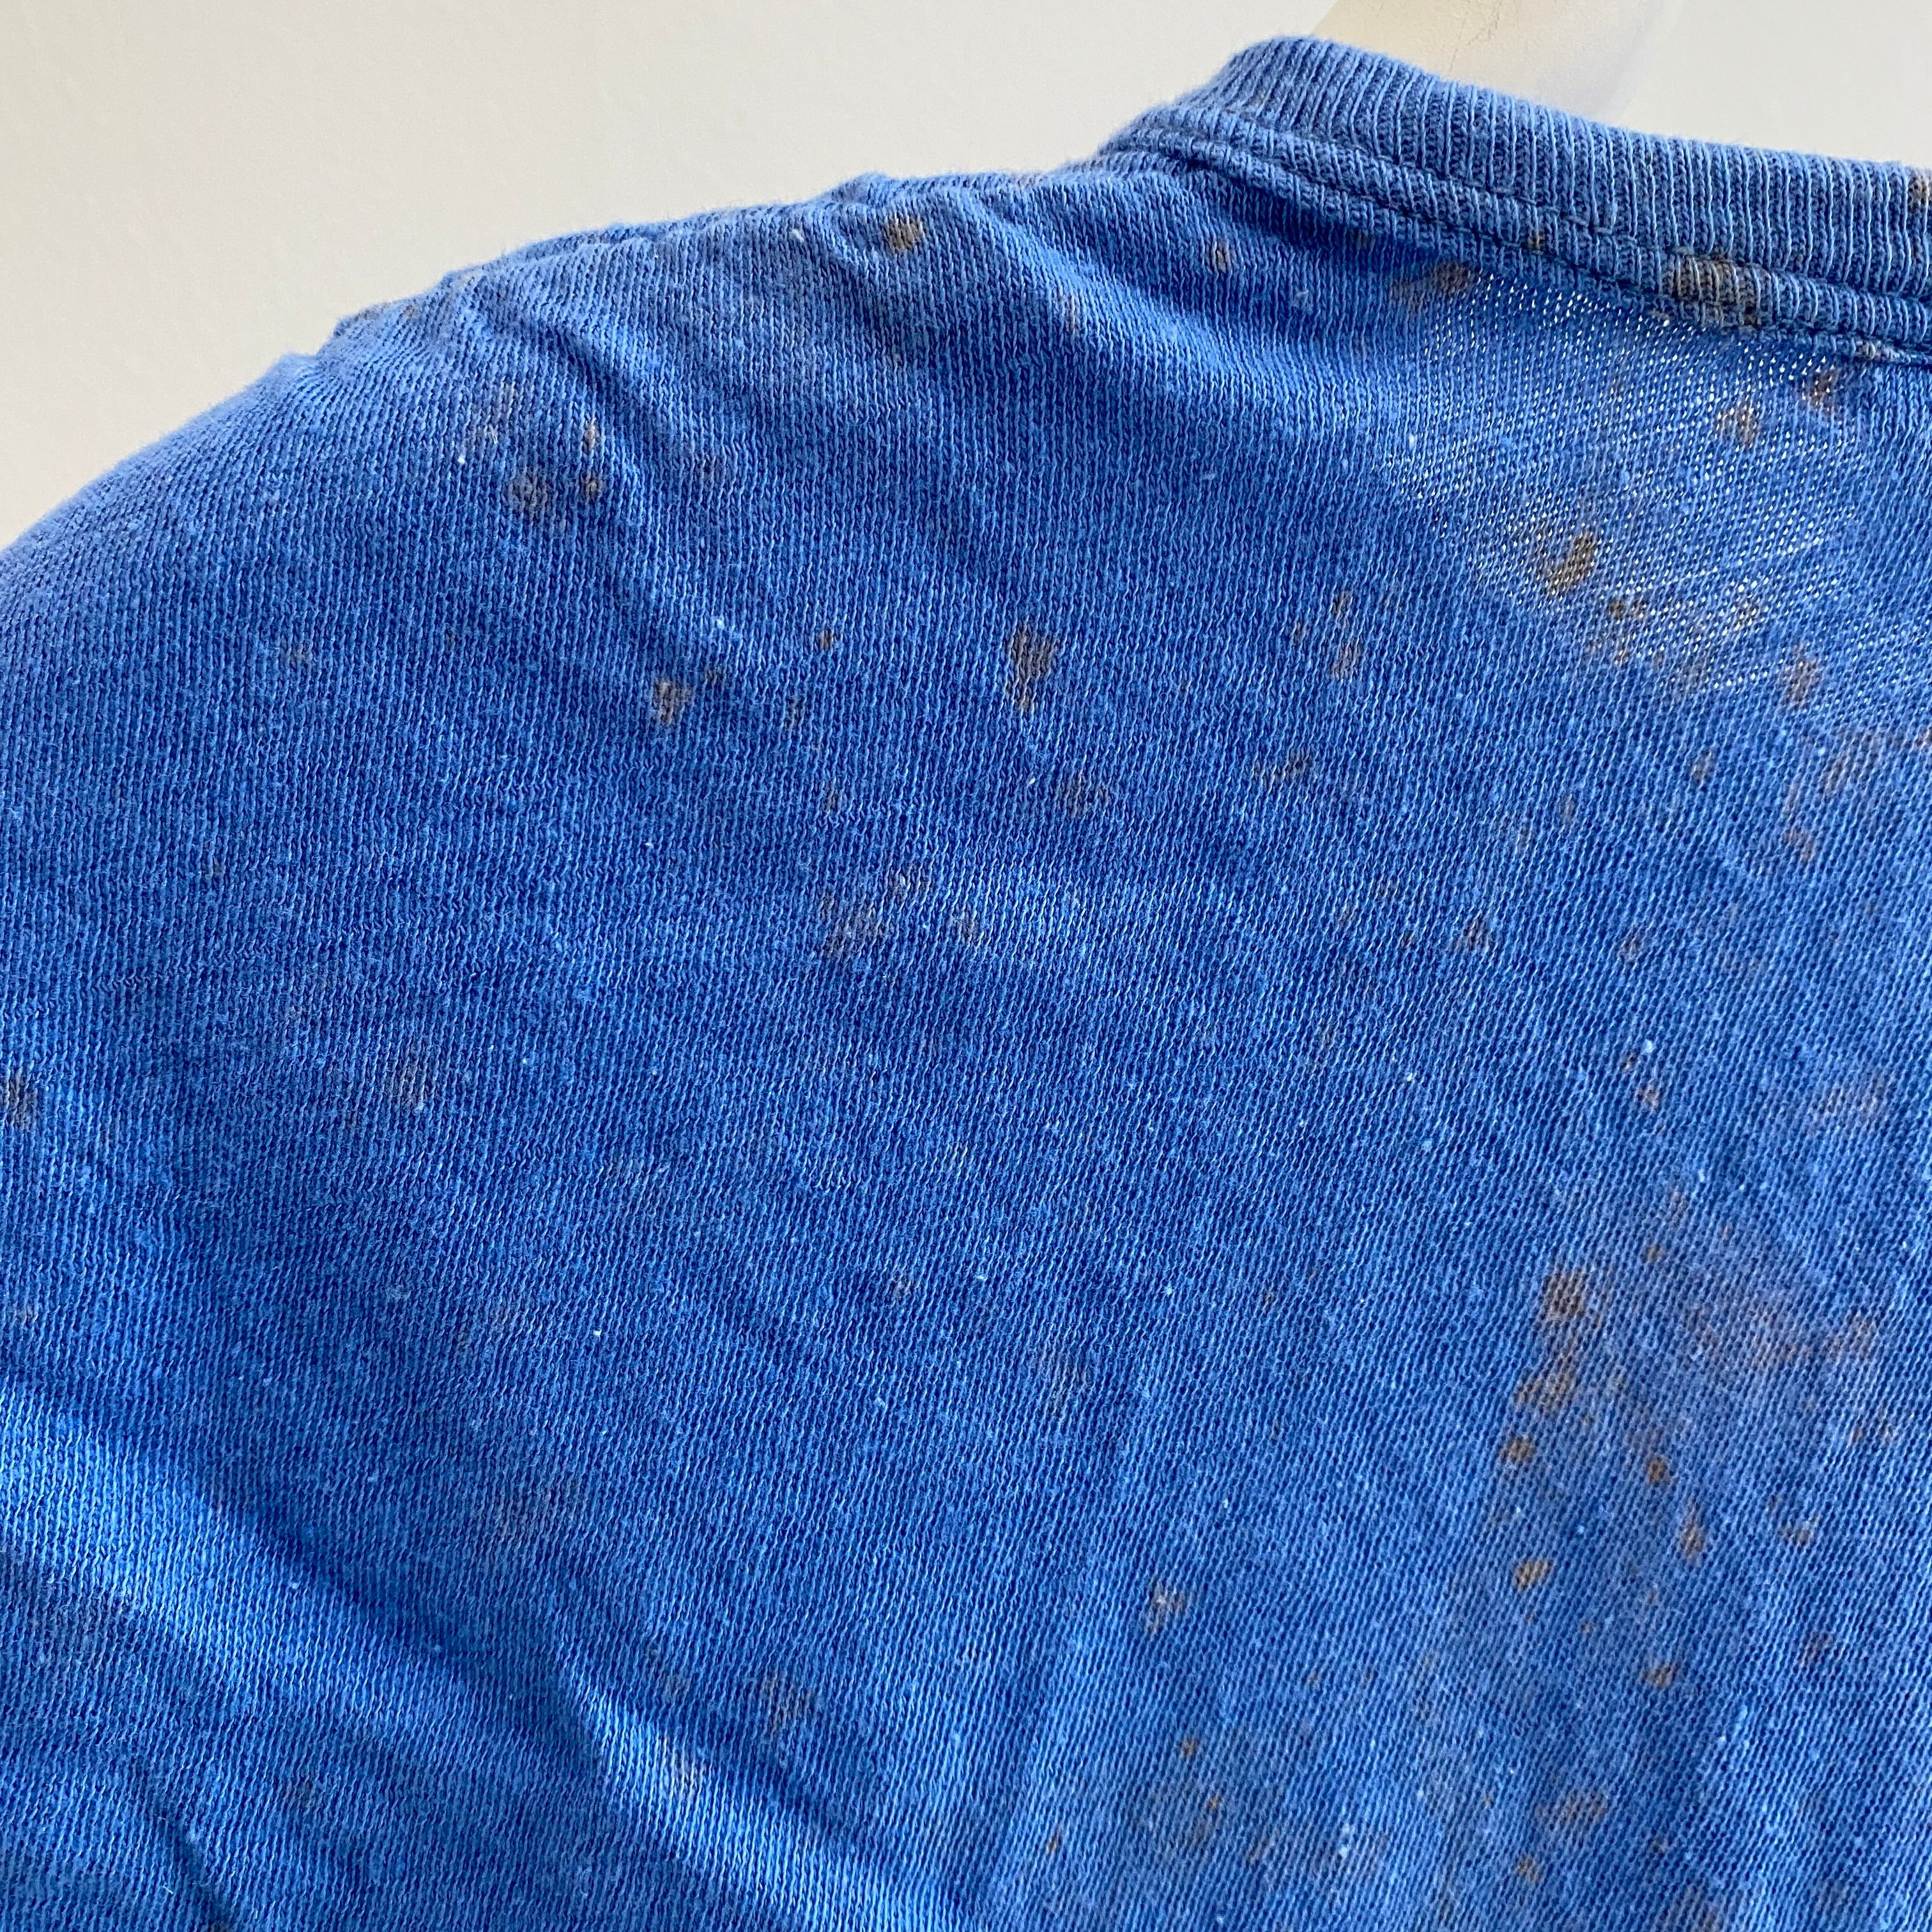 Incredibly Stained and Faded Cotton Knit T-Shirt - Made in Pakistan